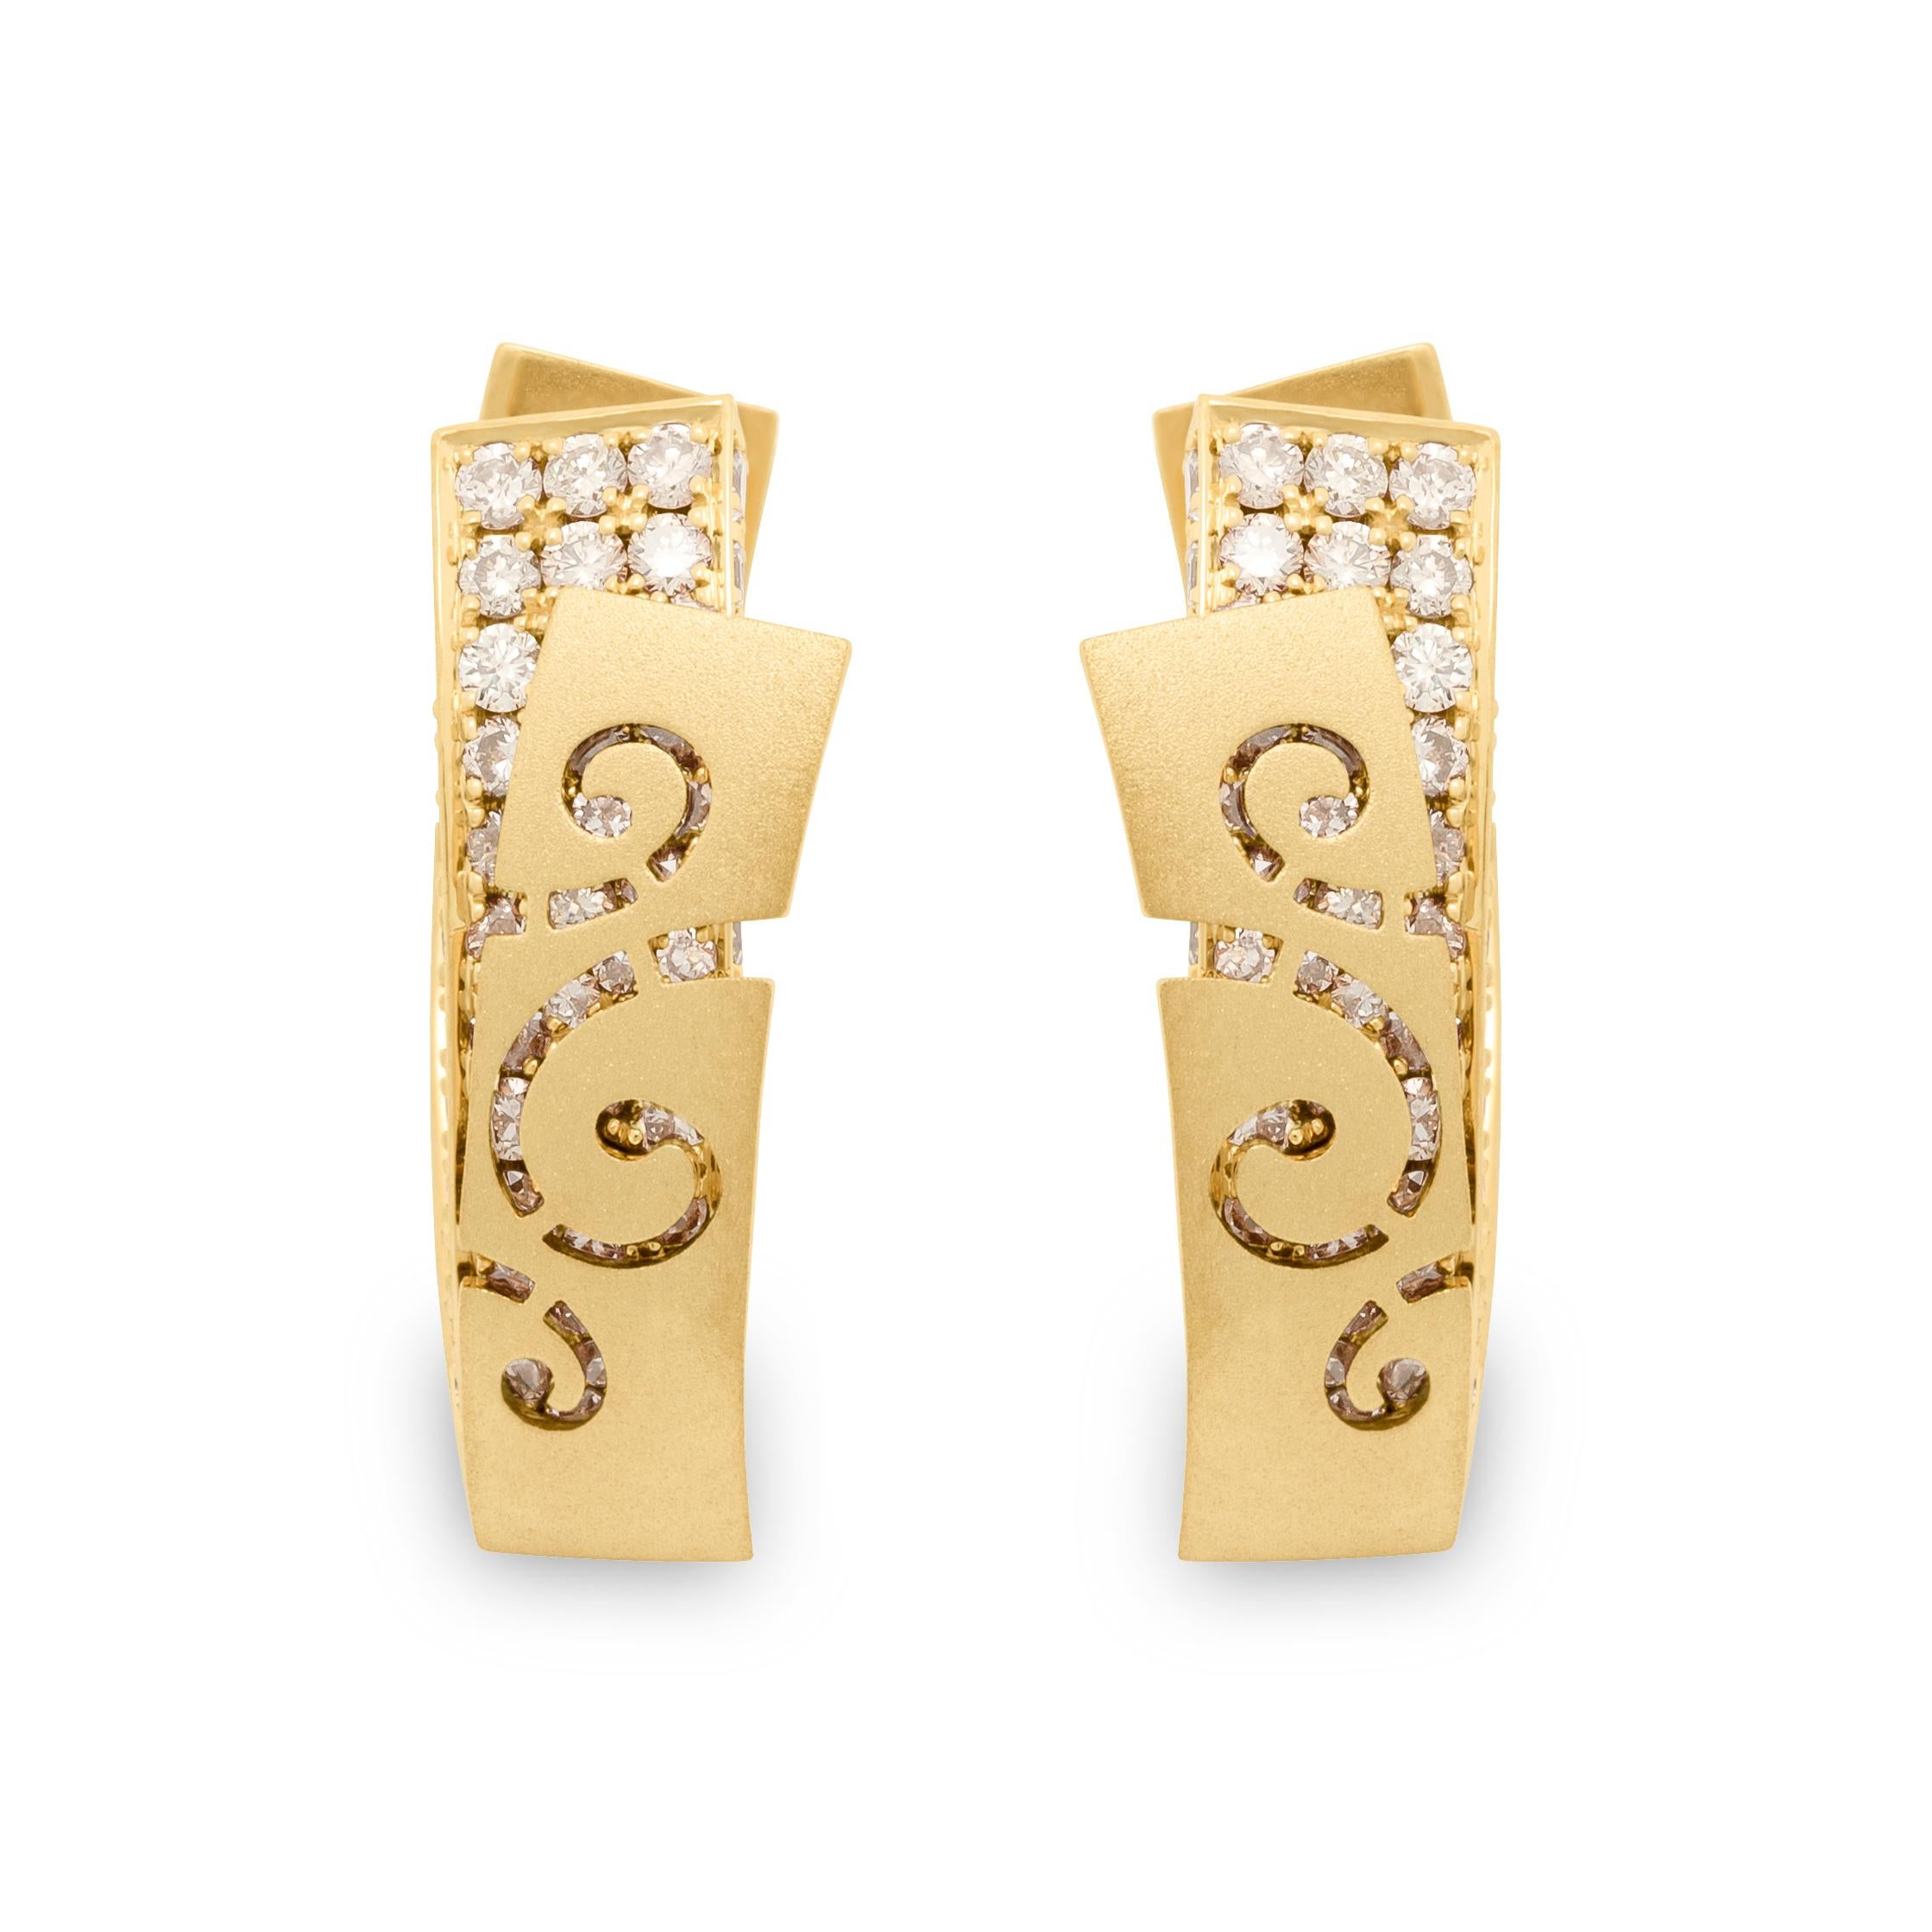 Champagne Diamonds 18 Karat Yellow Gold Small Veil Earrings
Veil inspired this jewelry series by our designers. For example, these Earrings seem to have two layers. The first layer is a 